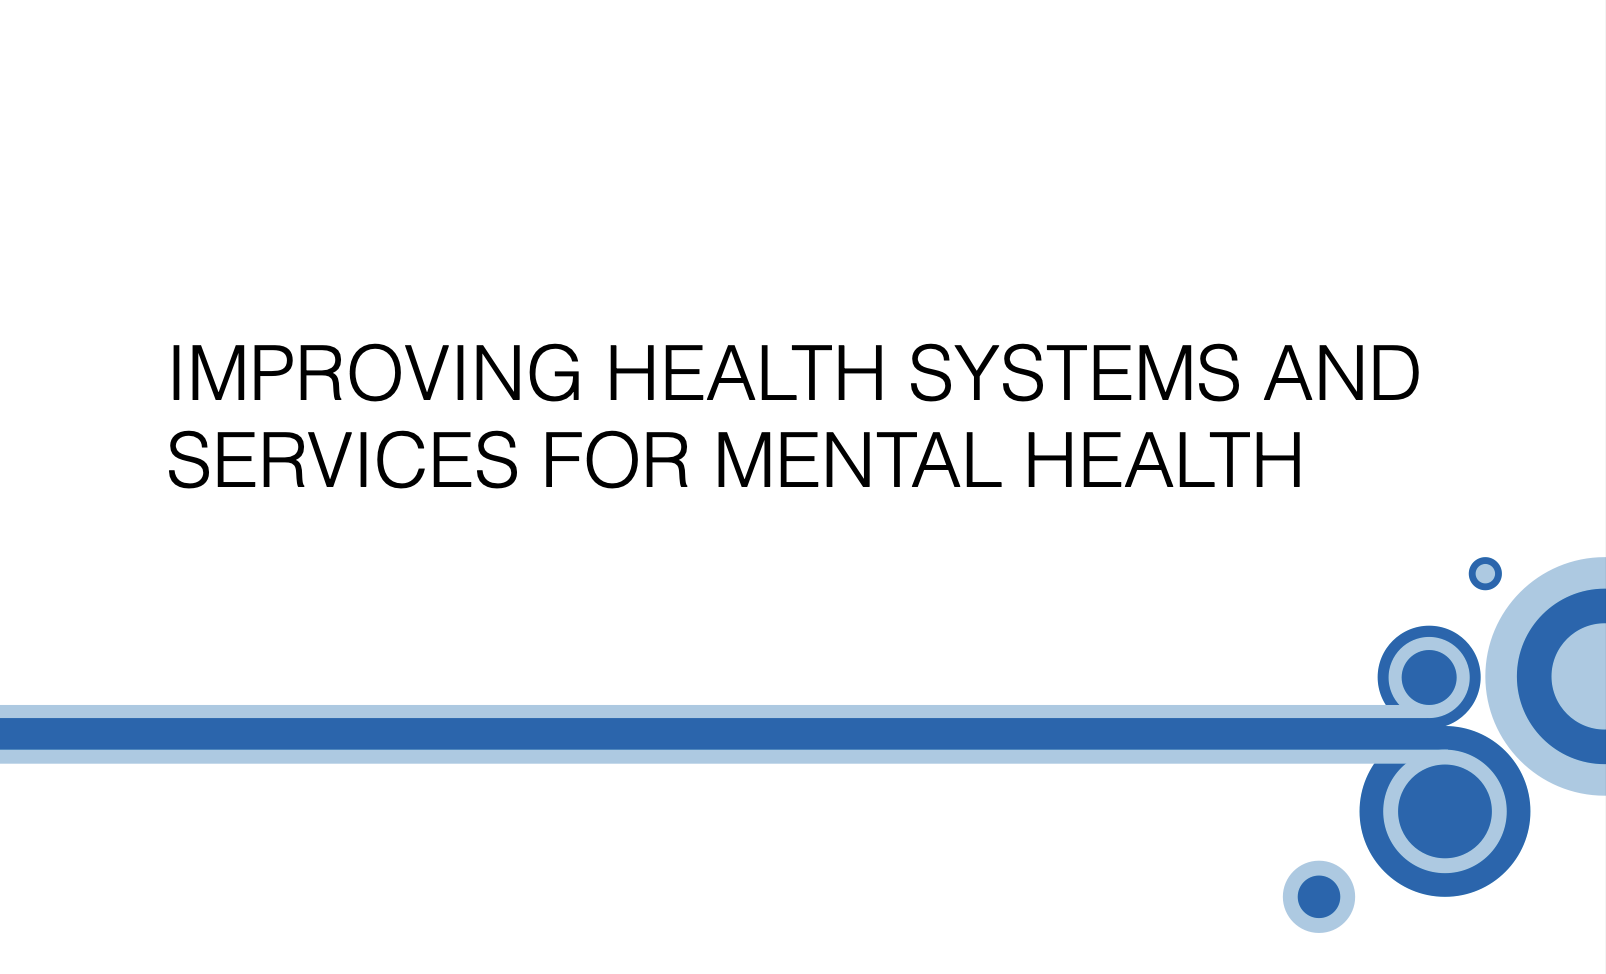 Improving health systems and services for mental health